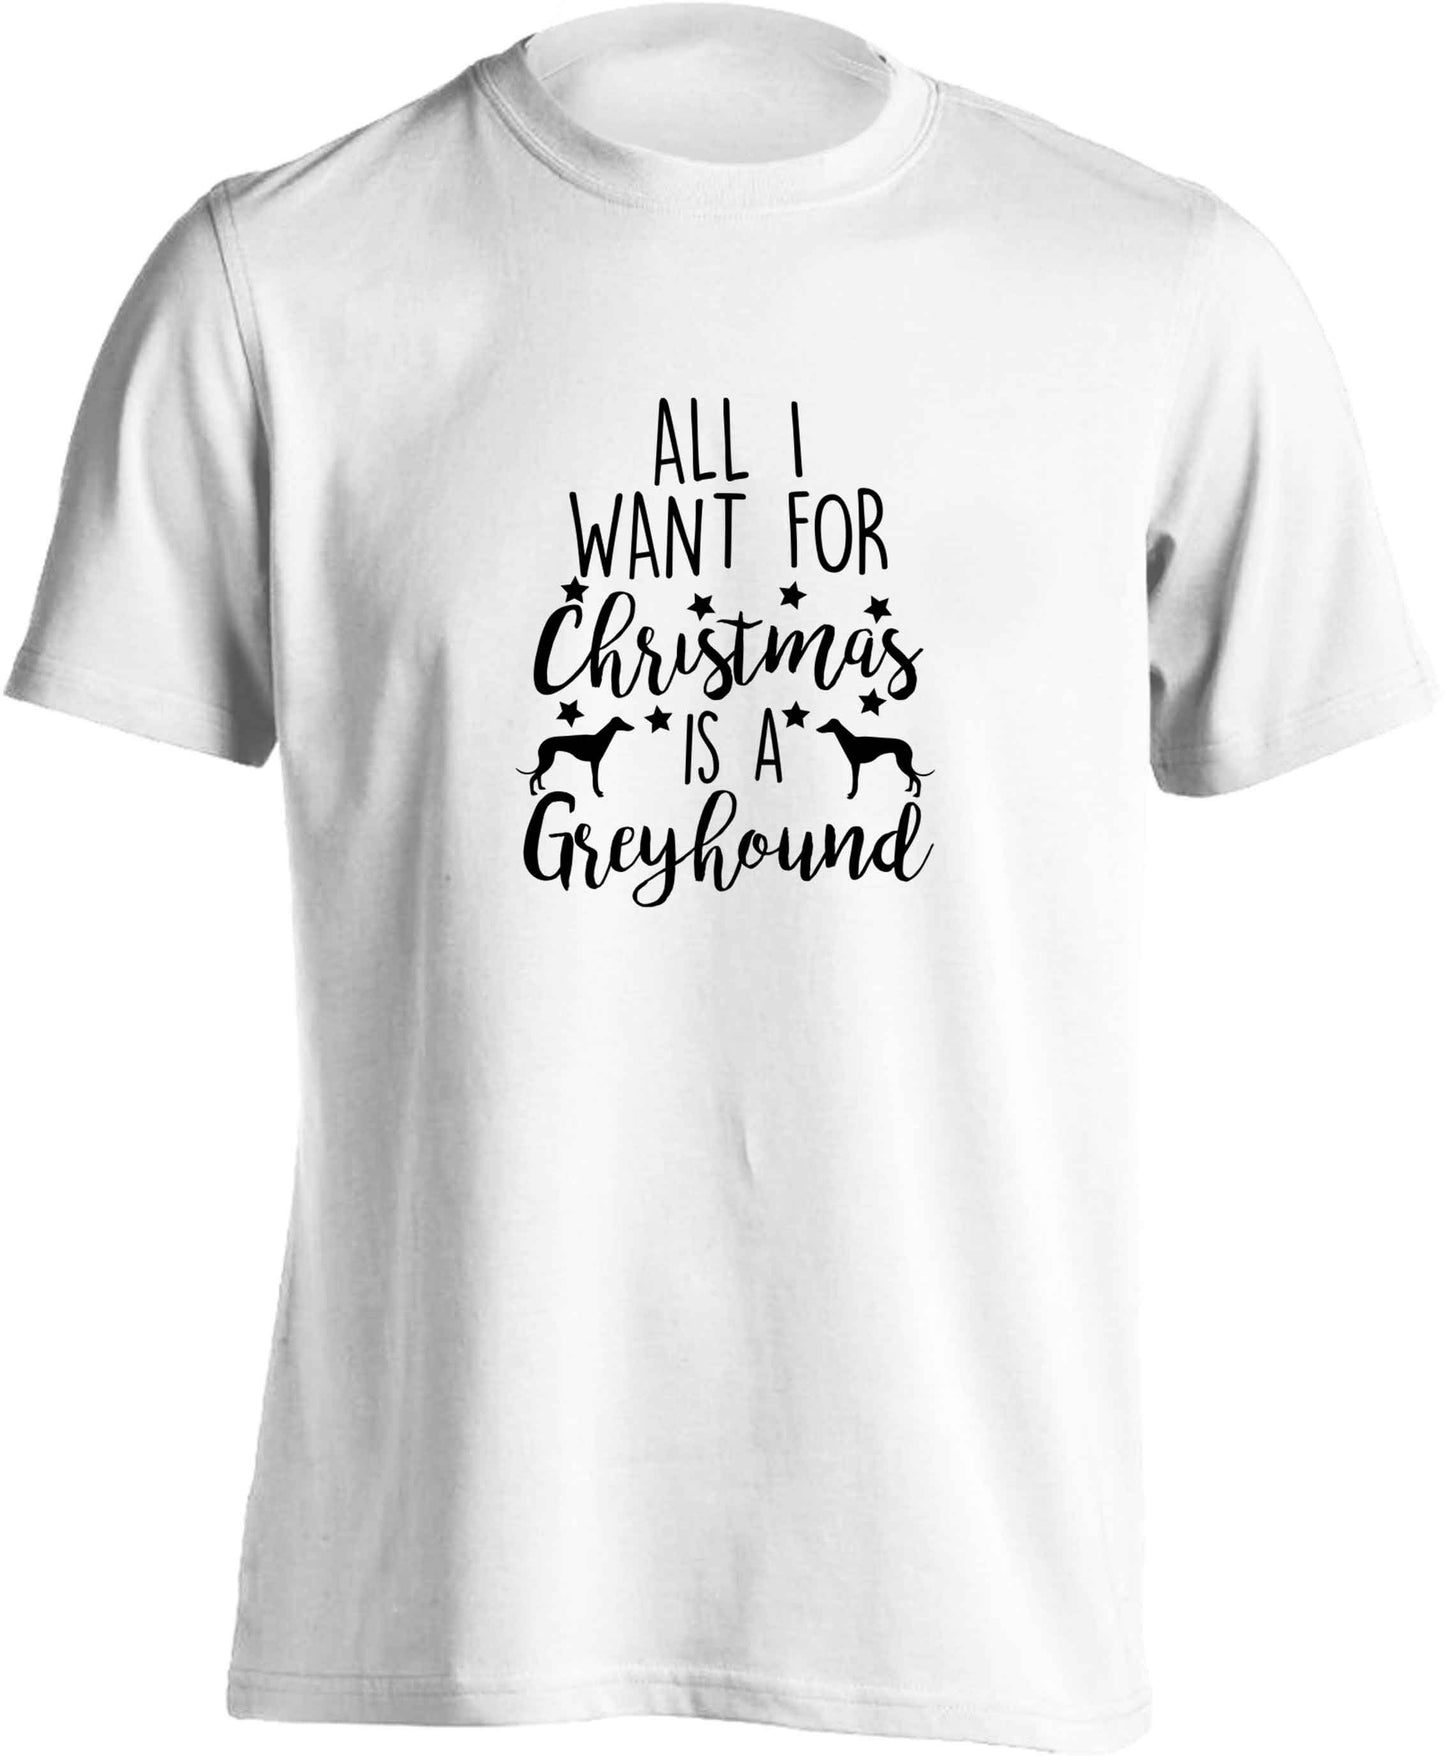 All I want for Christmas is a greyhound adults unisex white Tshirt 2XL